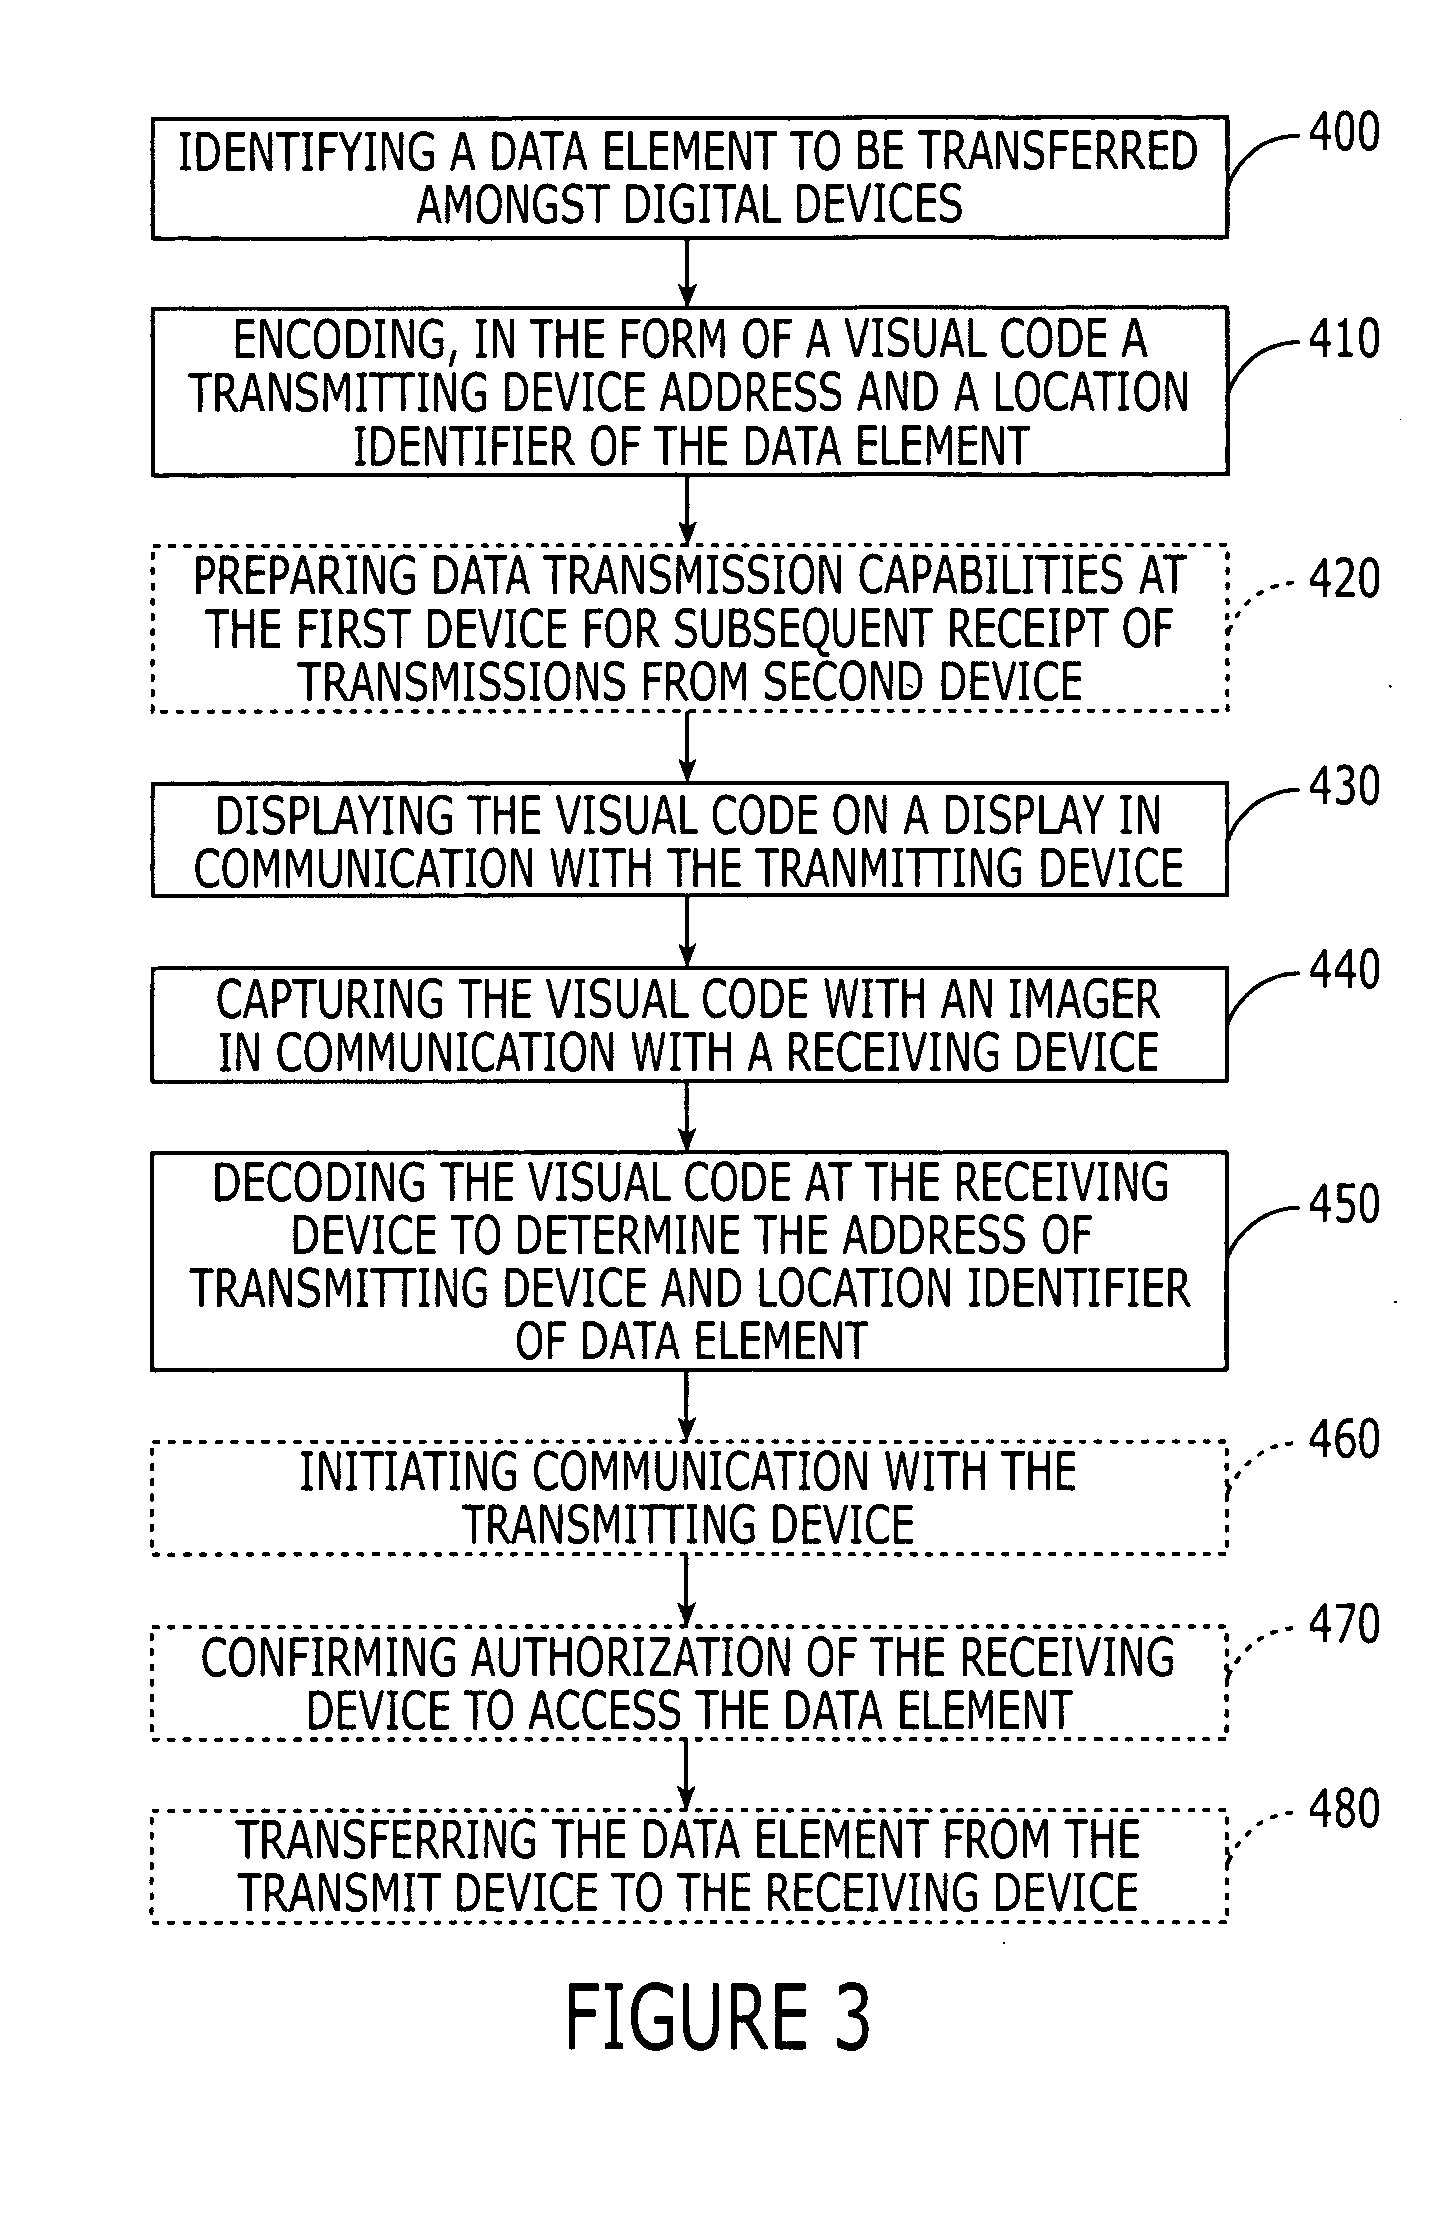 Visual encoding of a content address to facilitate data transfer in digital devices